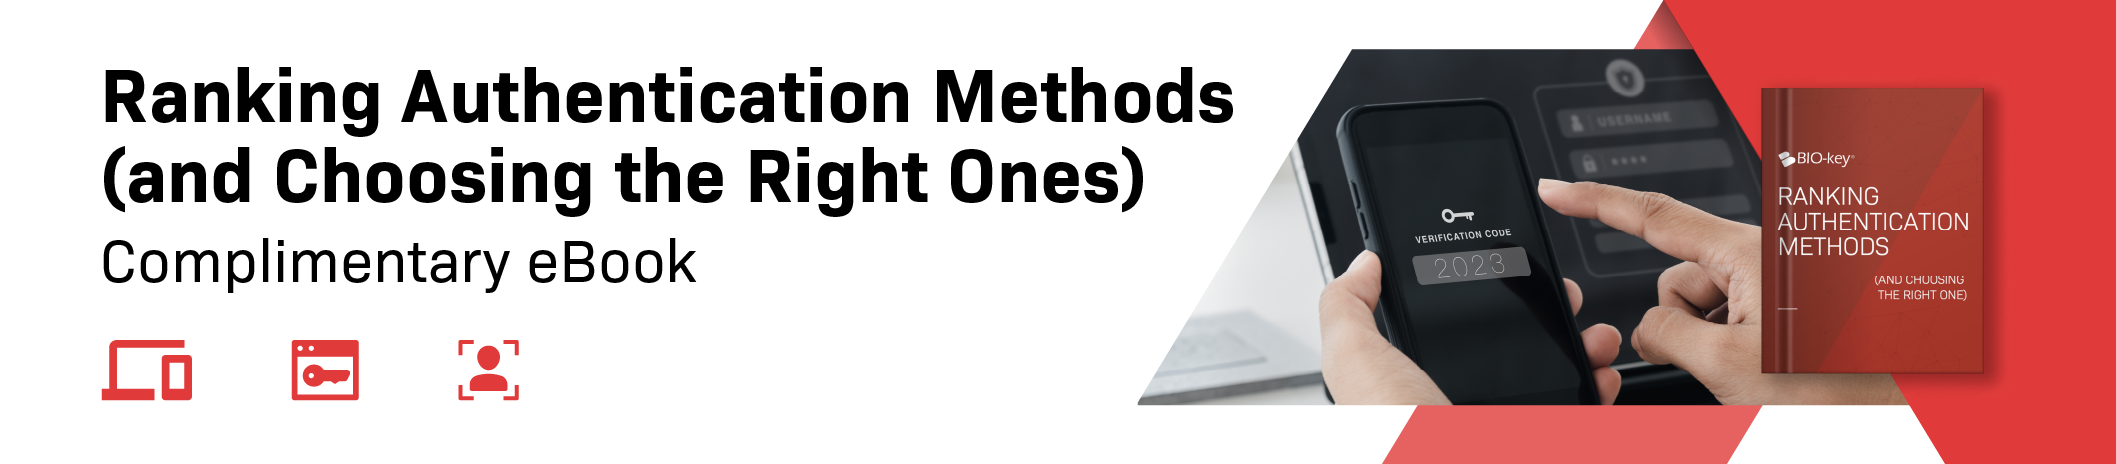 Ranking Authentication Methods (And Choosing the Right Ones) eBook